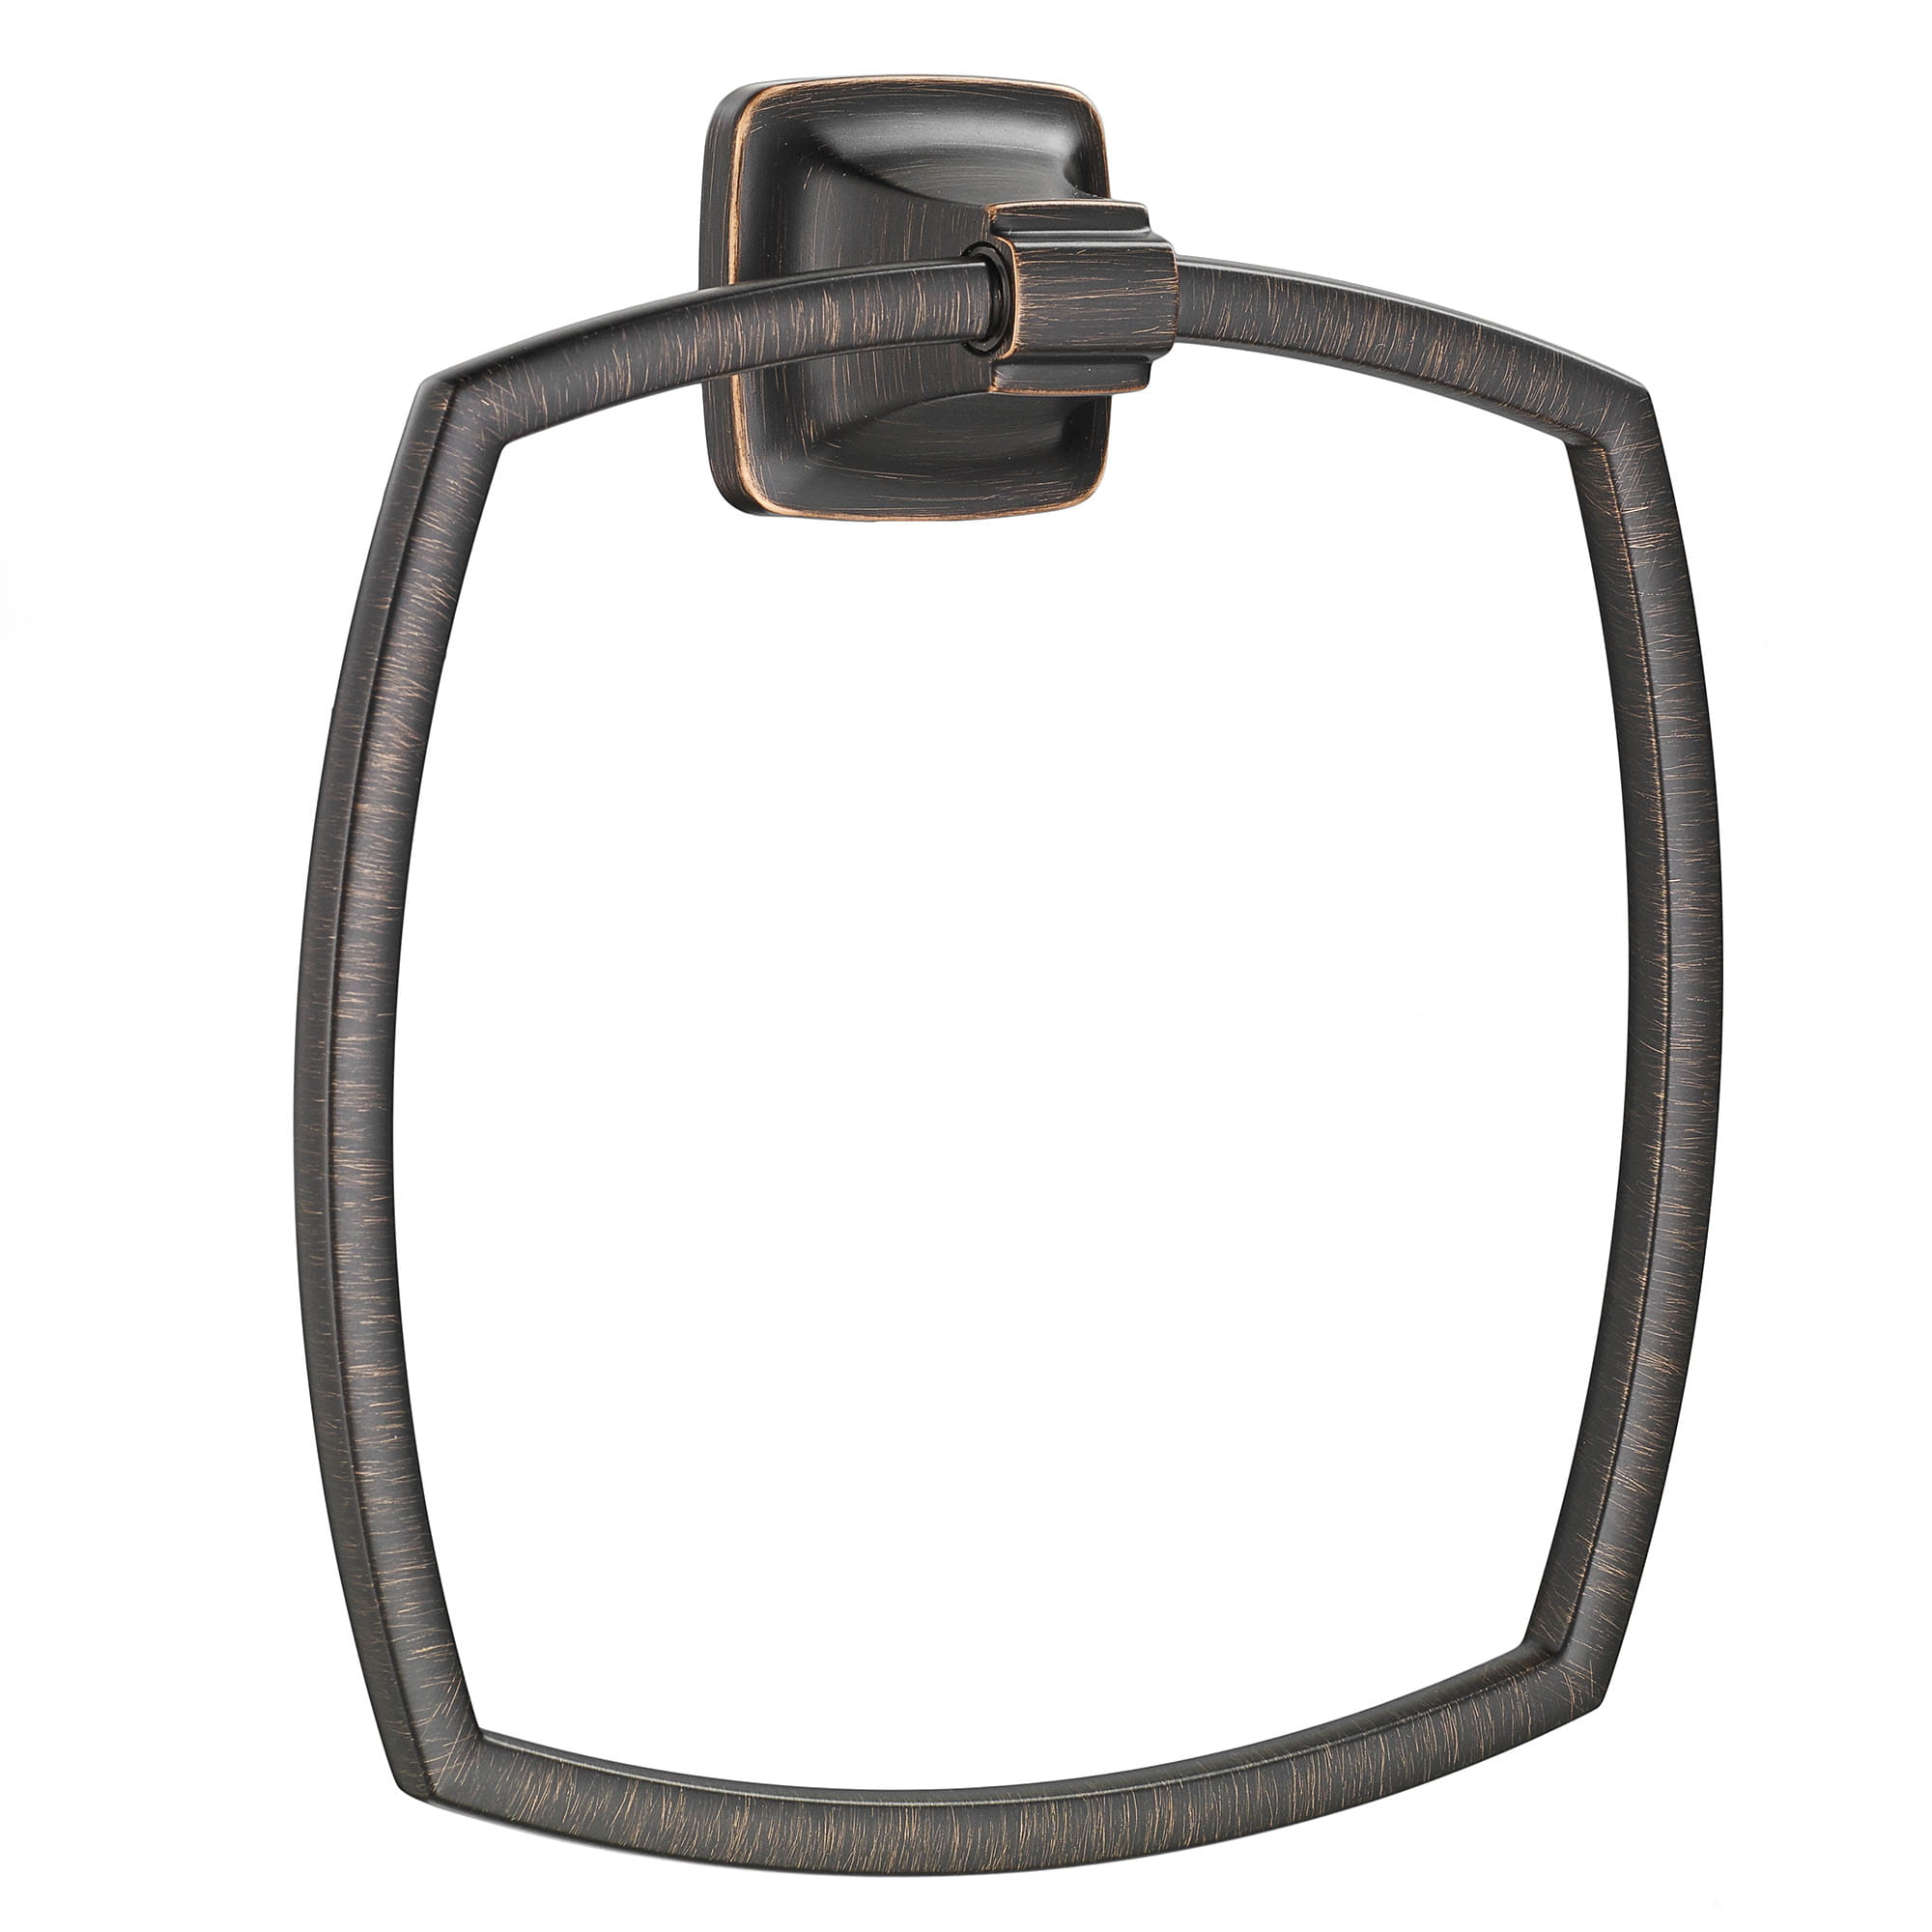 Townsend Towel Ring LEGACY BRONZE